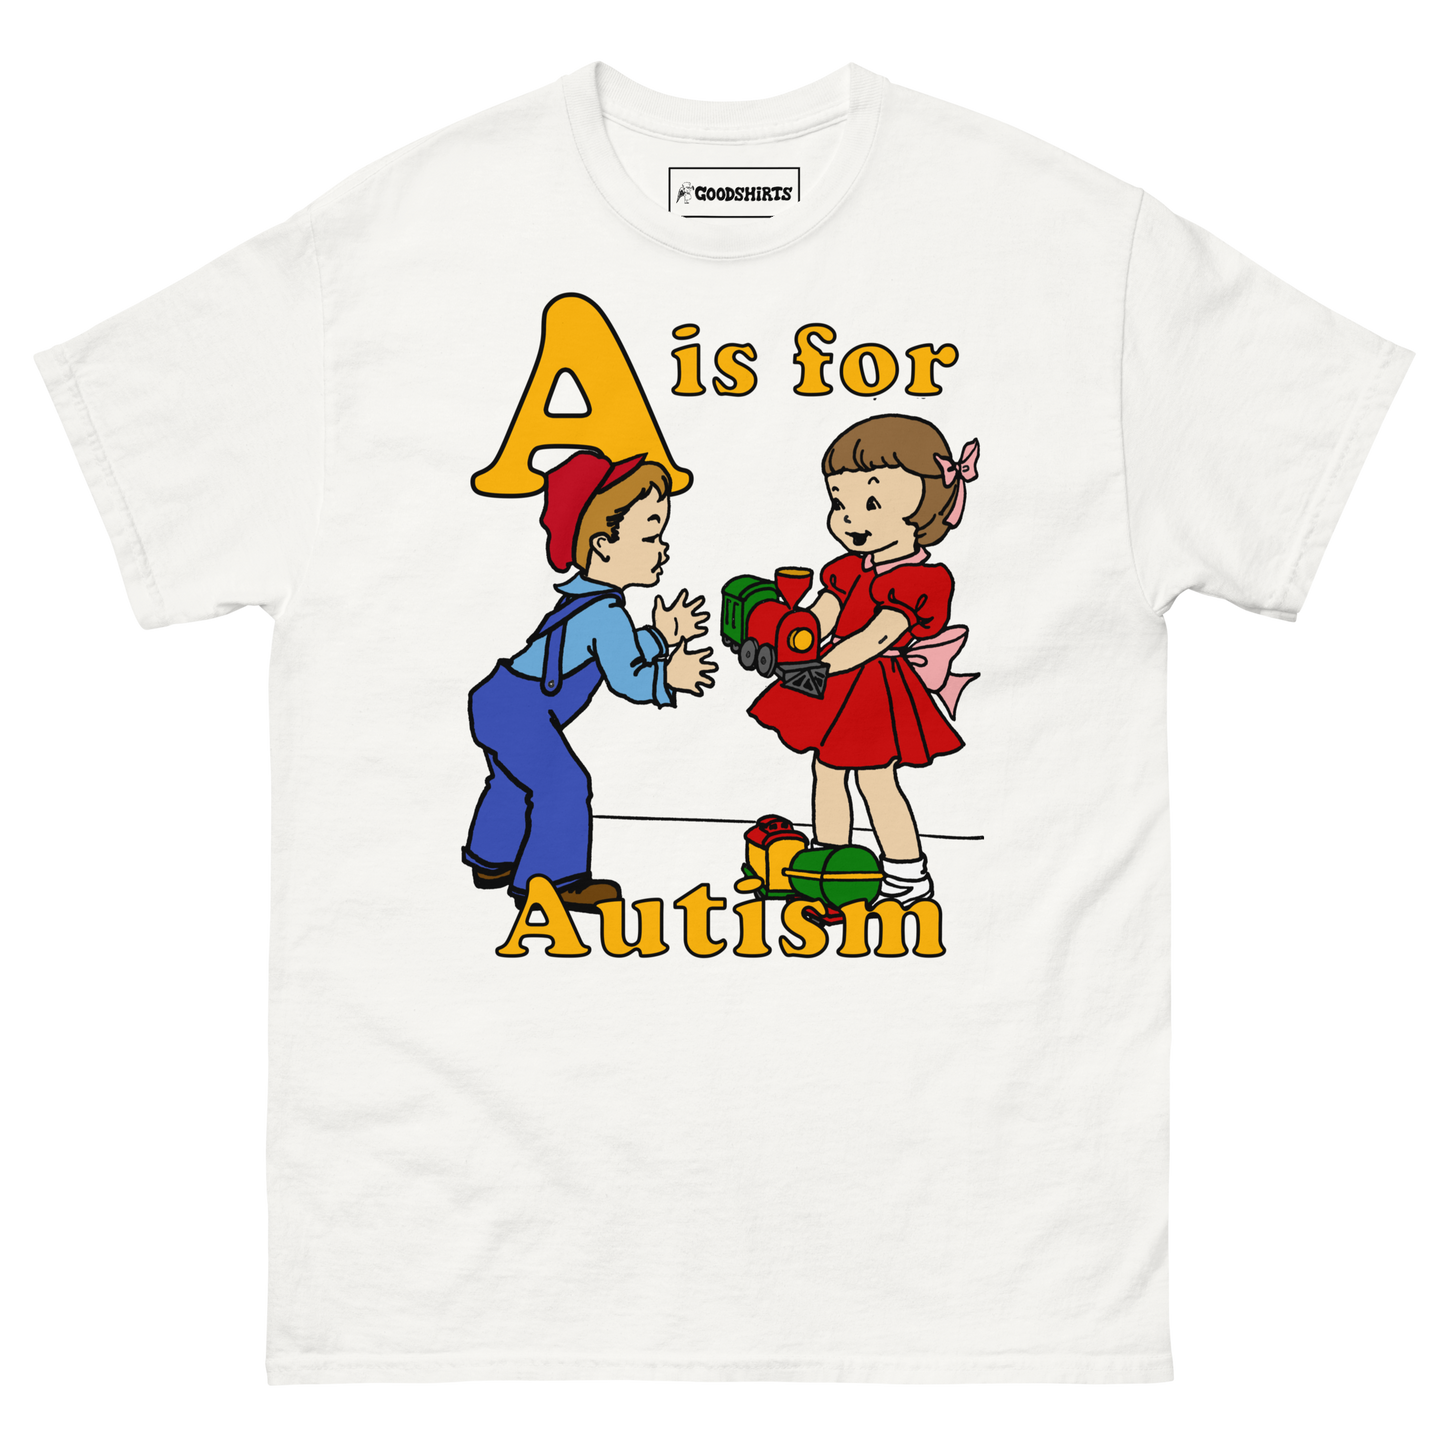 A Is For Autism.